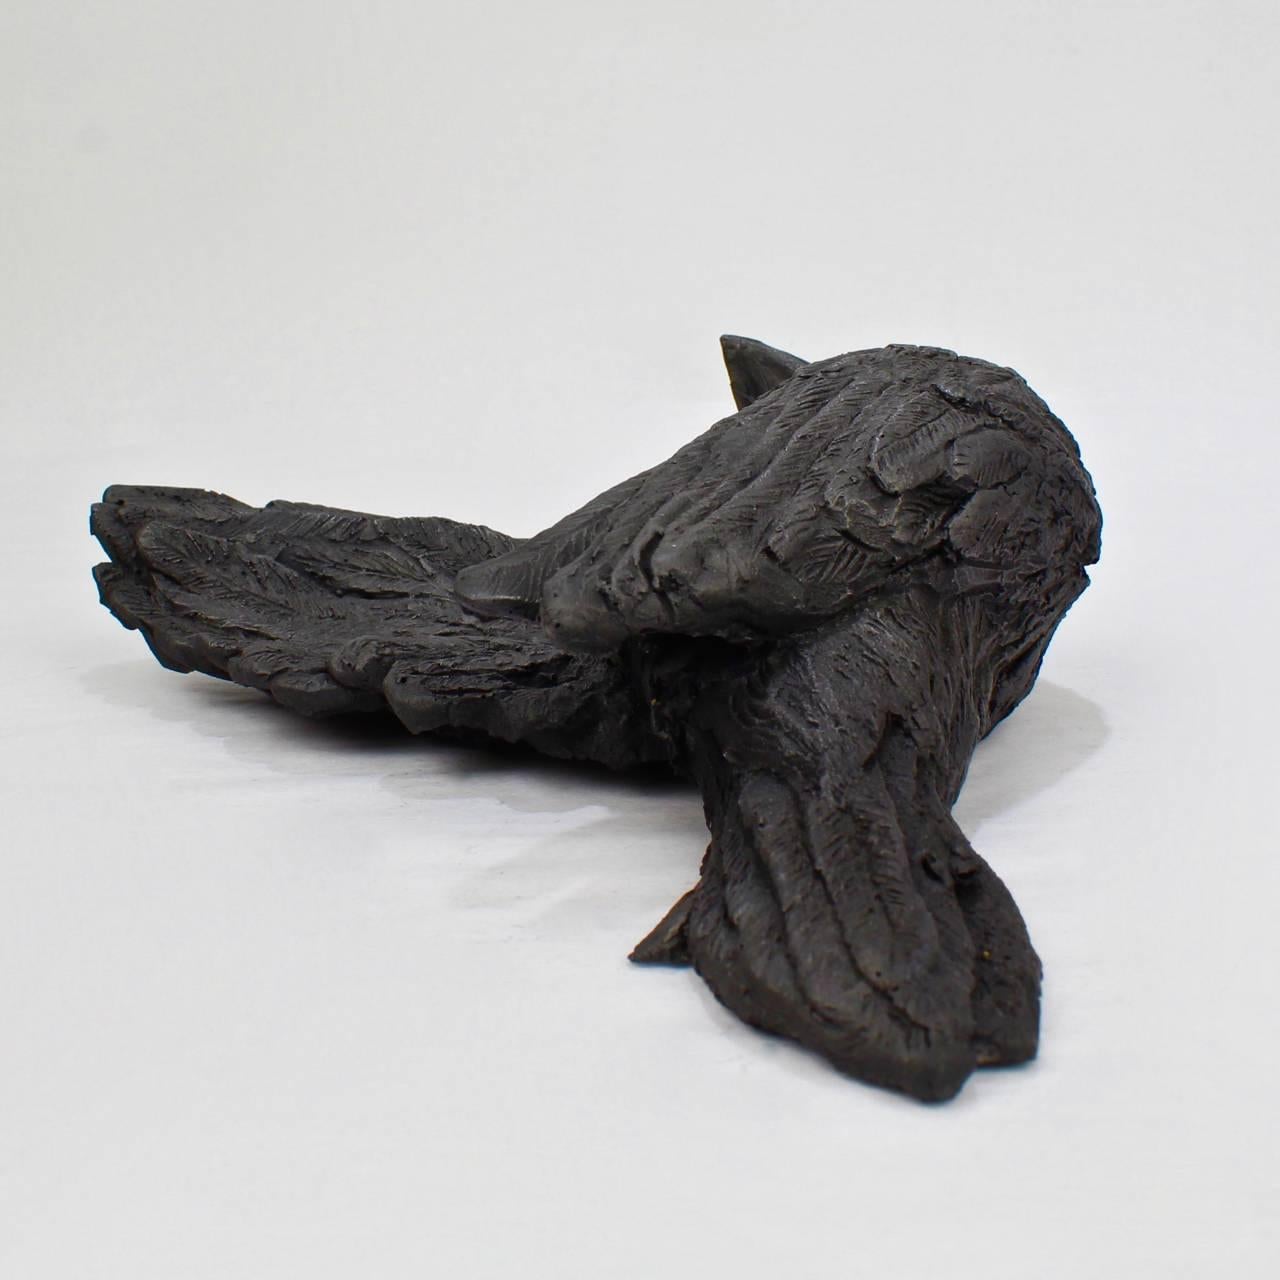 Title: We All Fall Down II.

A cast black gesso and raw graphite resin sculpture of a fallen bird by Darla Jackson.

Date: 2016.

Length: ca. 7 3/4 in.

Also available in bronze on commission basis at $1500. 

Darla Jackson was born in